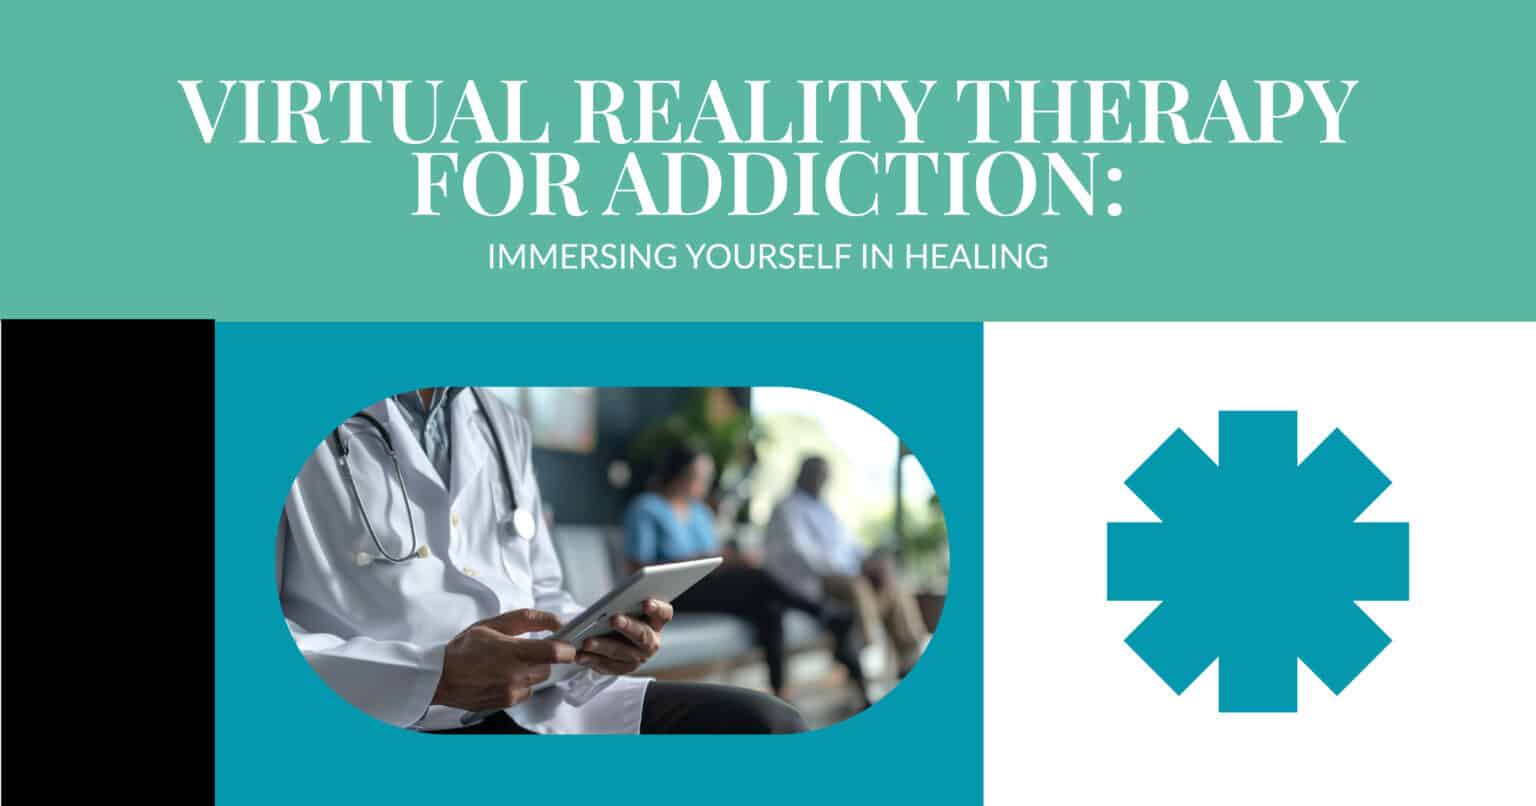 Virtual reality therapy for addiction